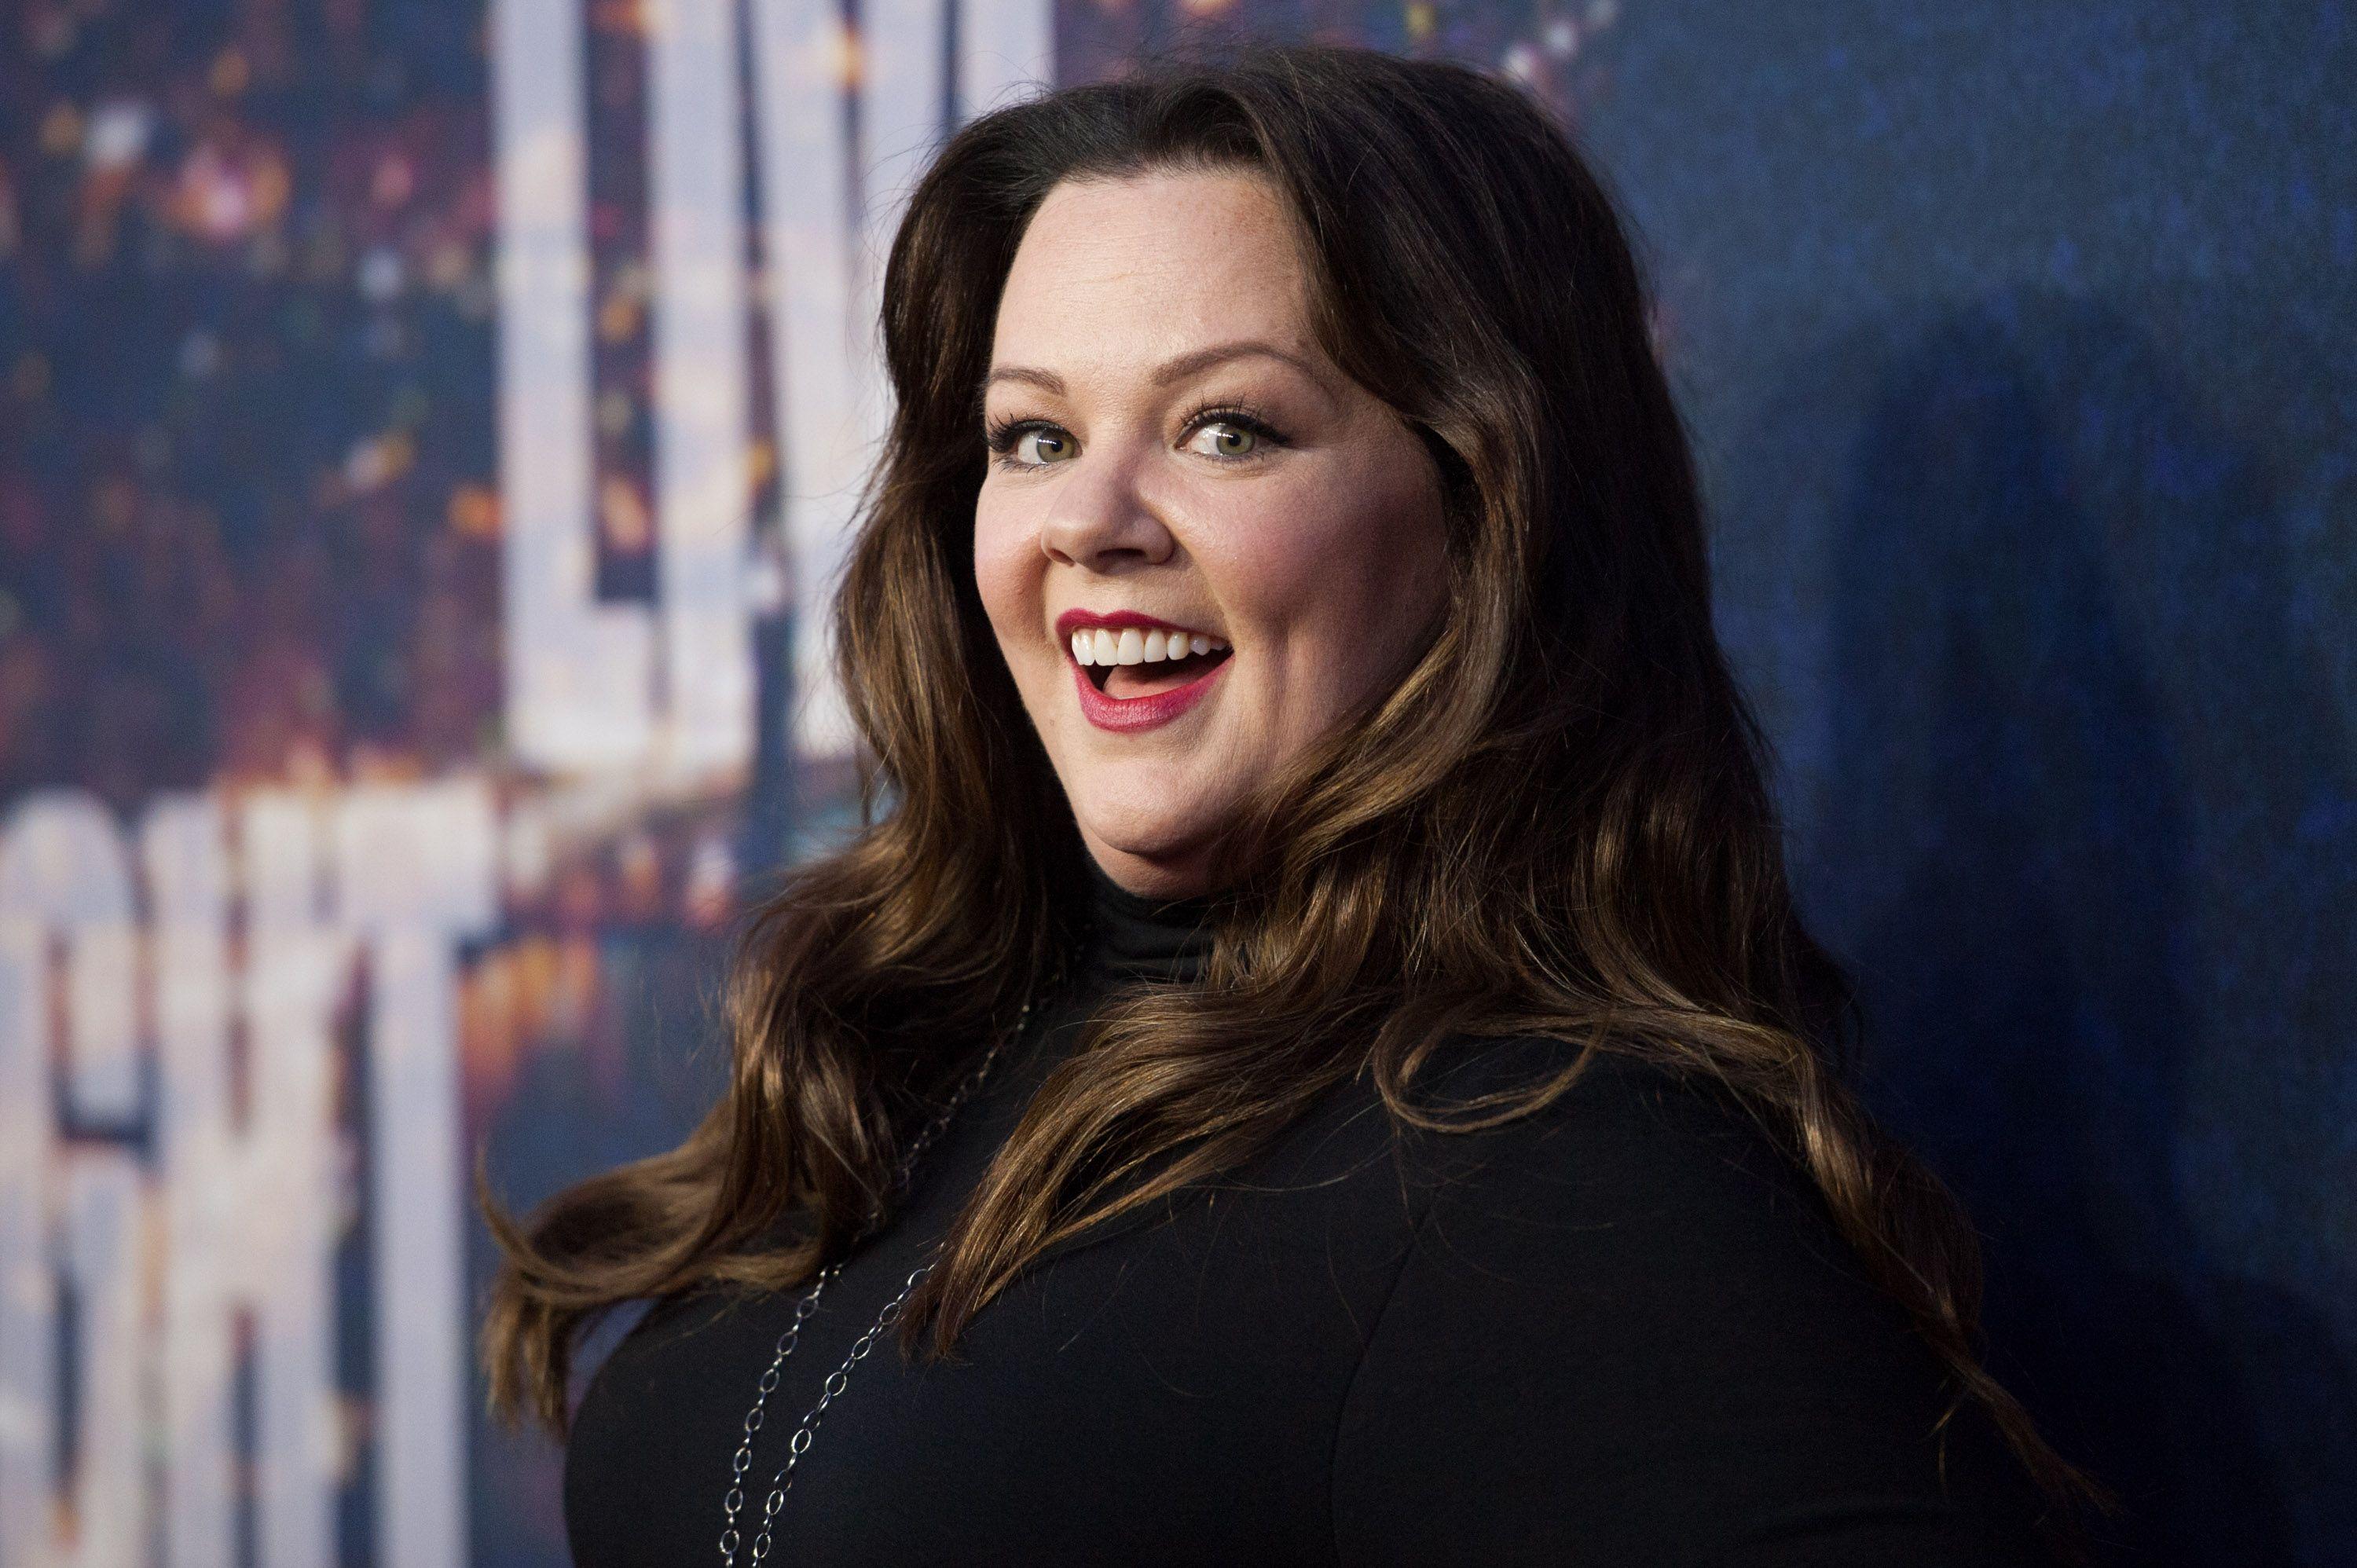 5. Melissa McCarthy's Blue Hair Inspires Fans to Try the Trend - wide 4